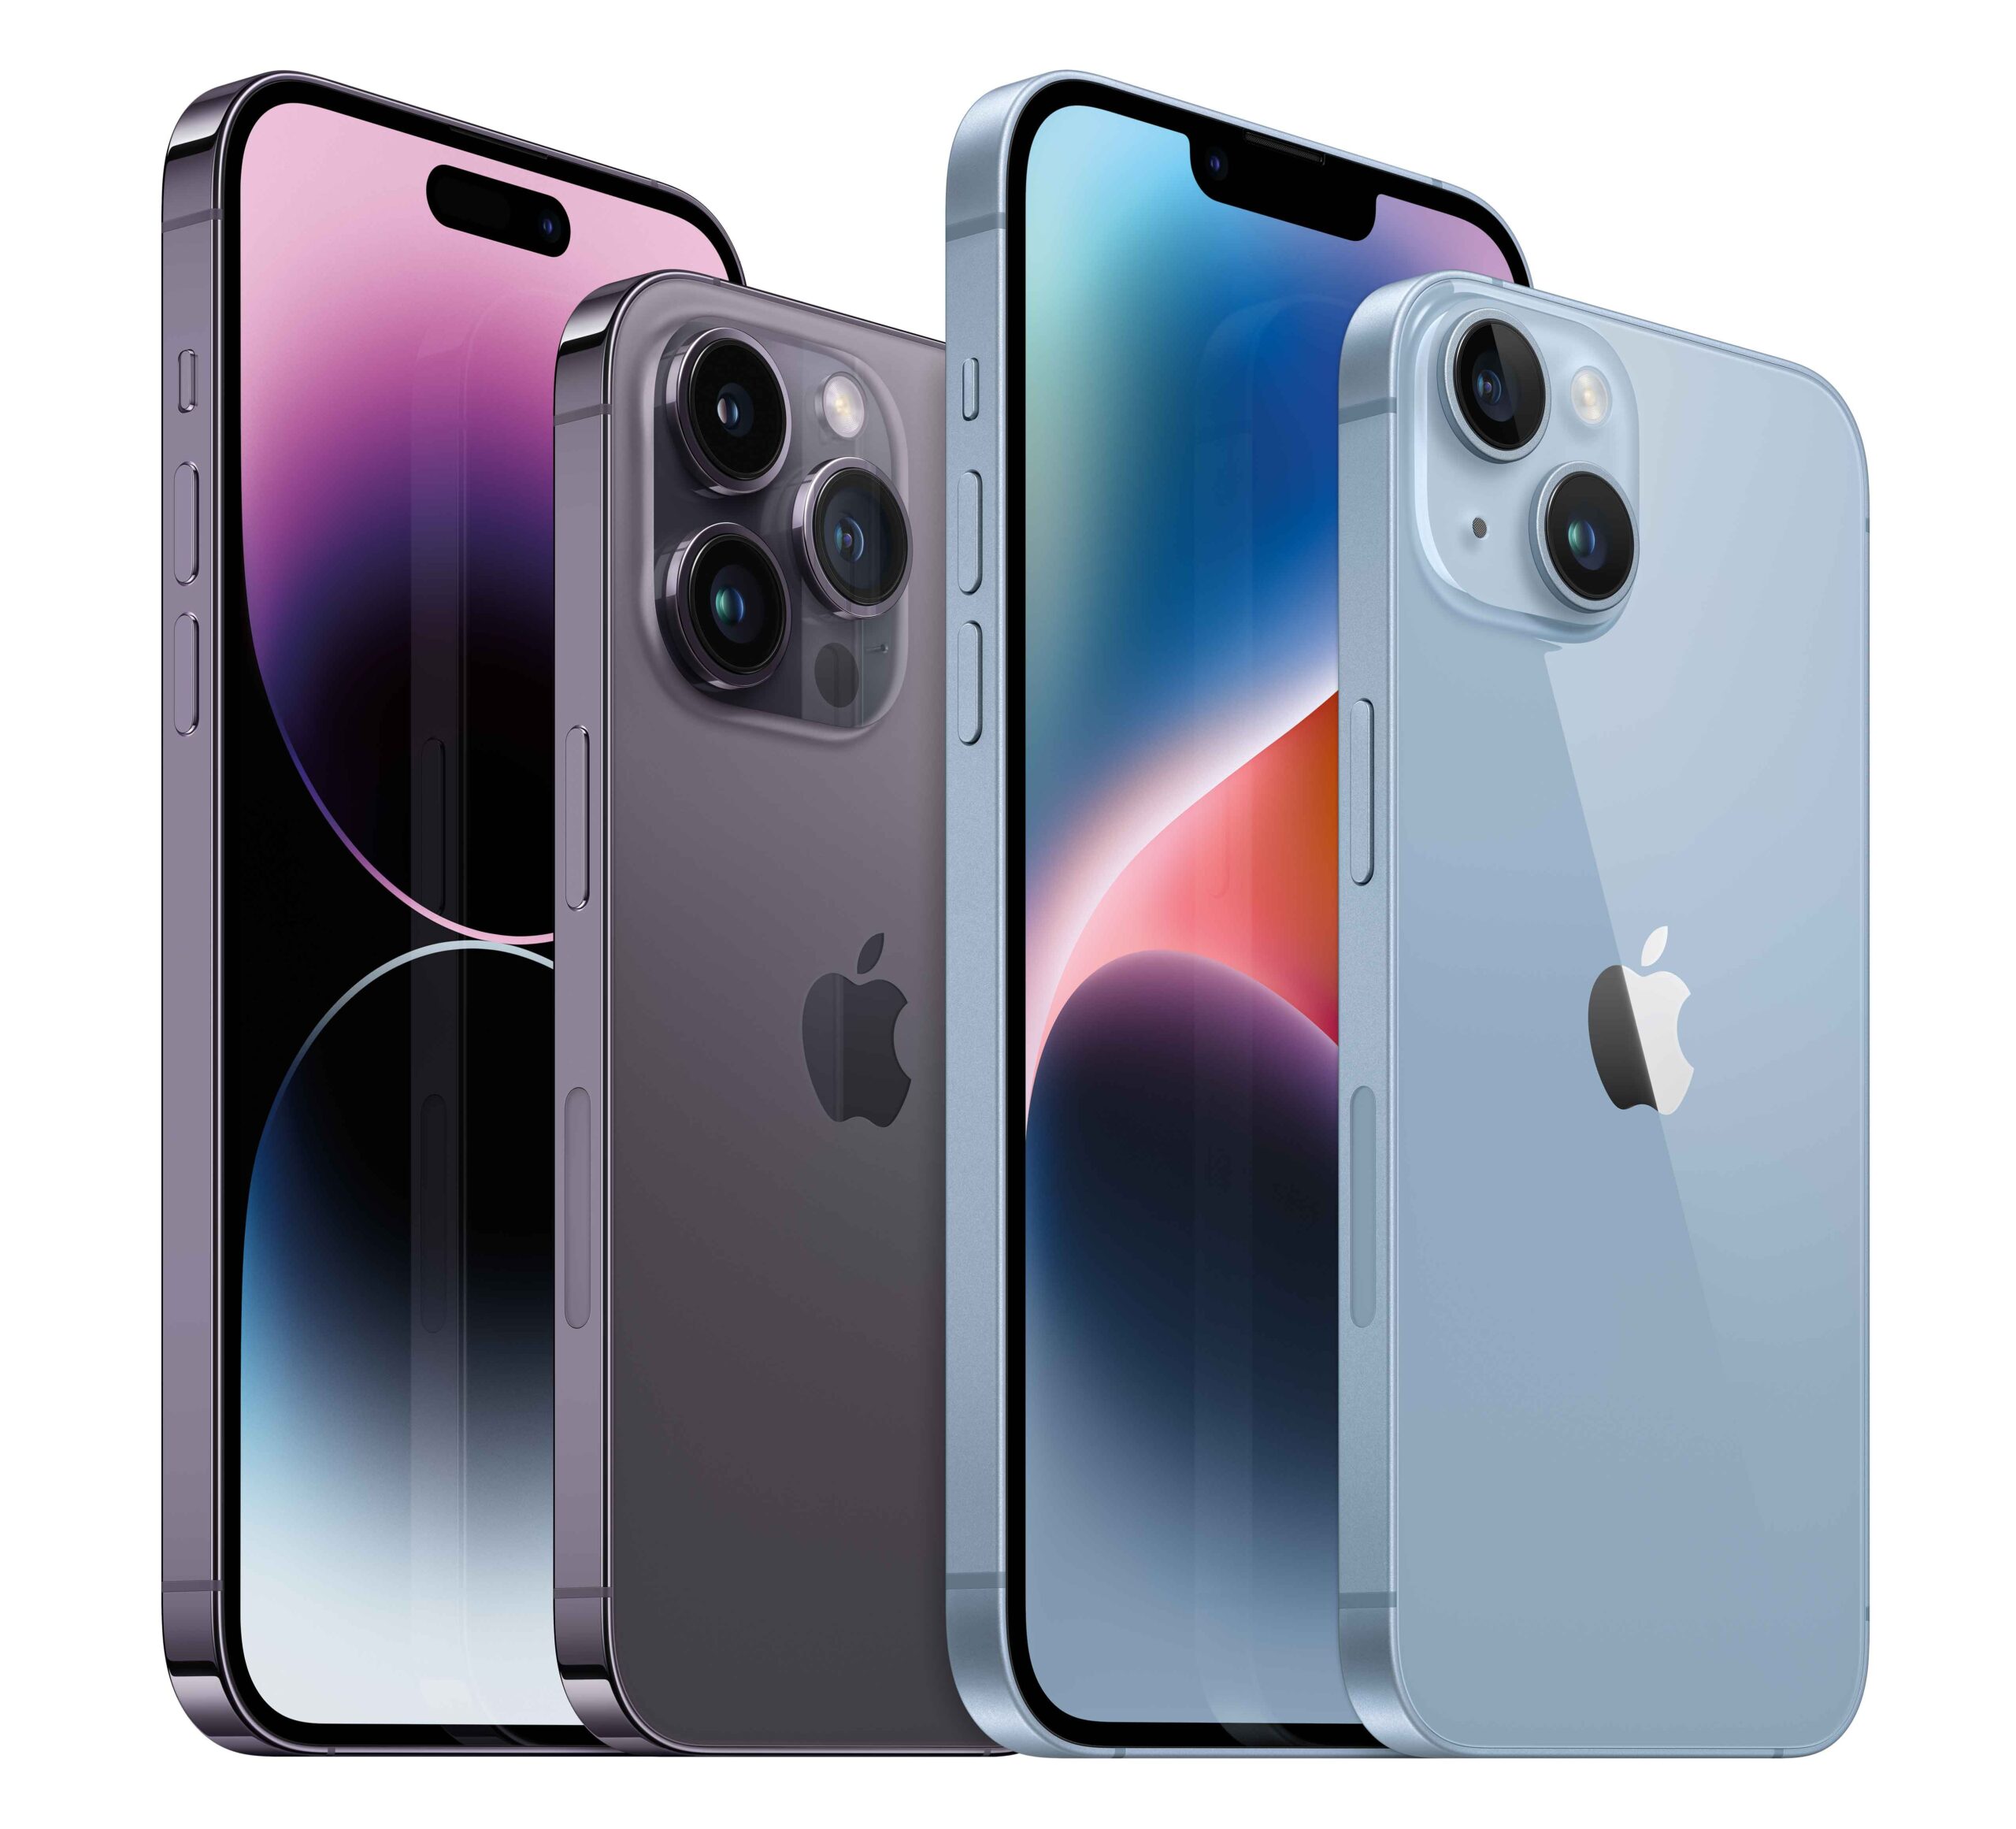 xfinity-mobile-offers-300-apple-iphone-discount-through-june-21st